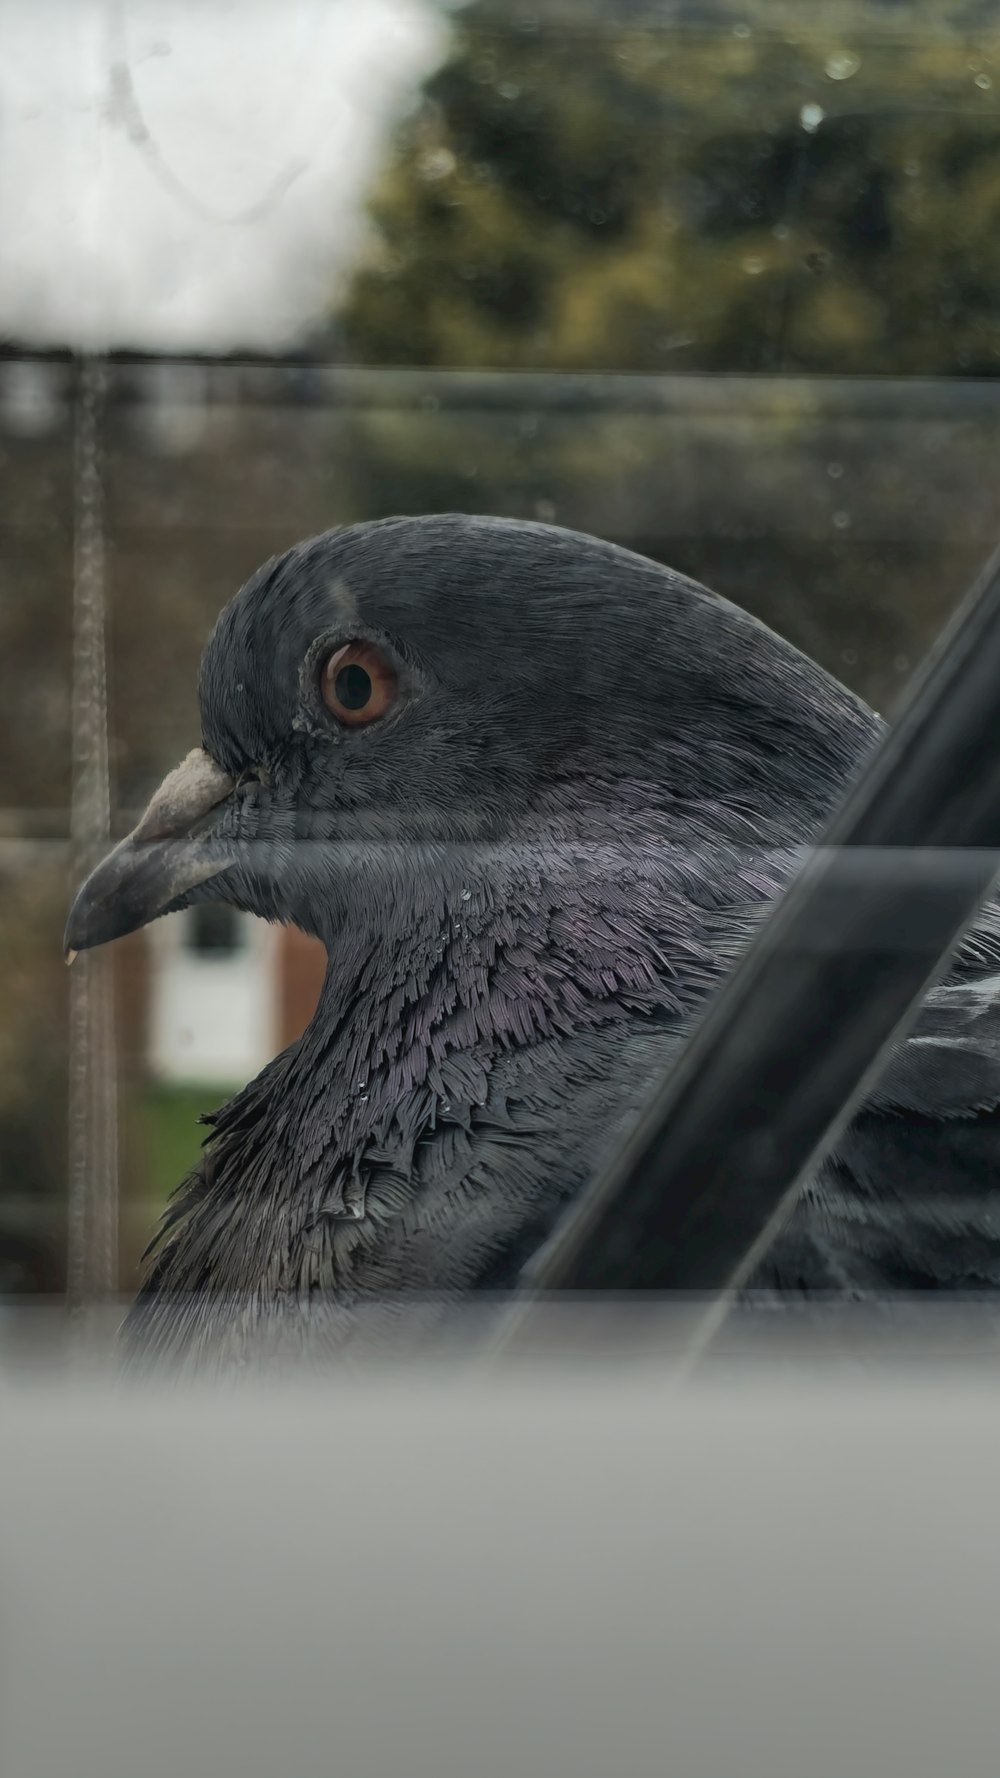 a close up of a bird looking out a window